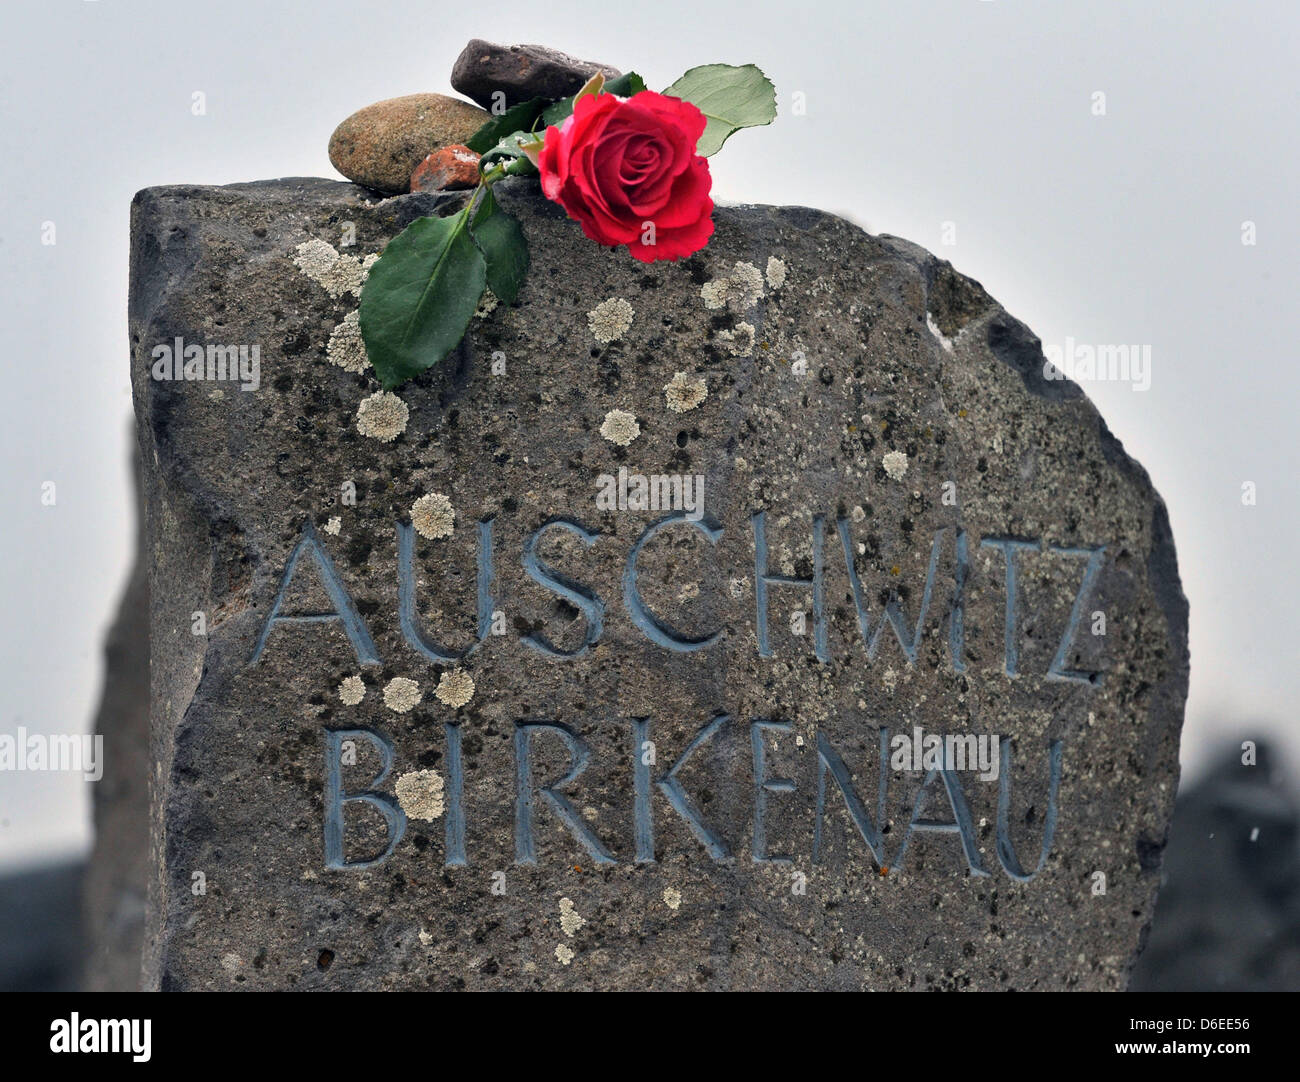 A rose sits on a stone reading 'Auschwitz Birkenau' on roll-call square of Buchenwald Concentration Camp near Weimar, Germany, 27 January 2012. The German state of Thuringia is commemorating the victims of National Socialism with a service in the state parliament, the laying of a wreath at Buchenwald and talks by eye witnesses. Since 1996, January 27th is a national day of remembra Stock Photo